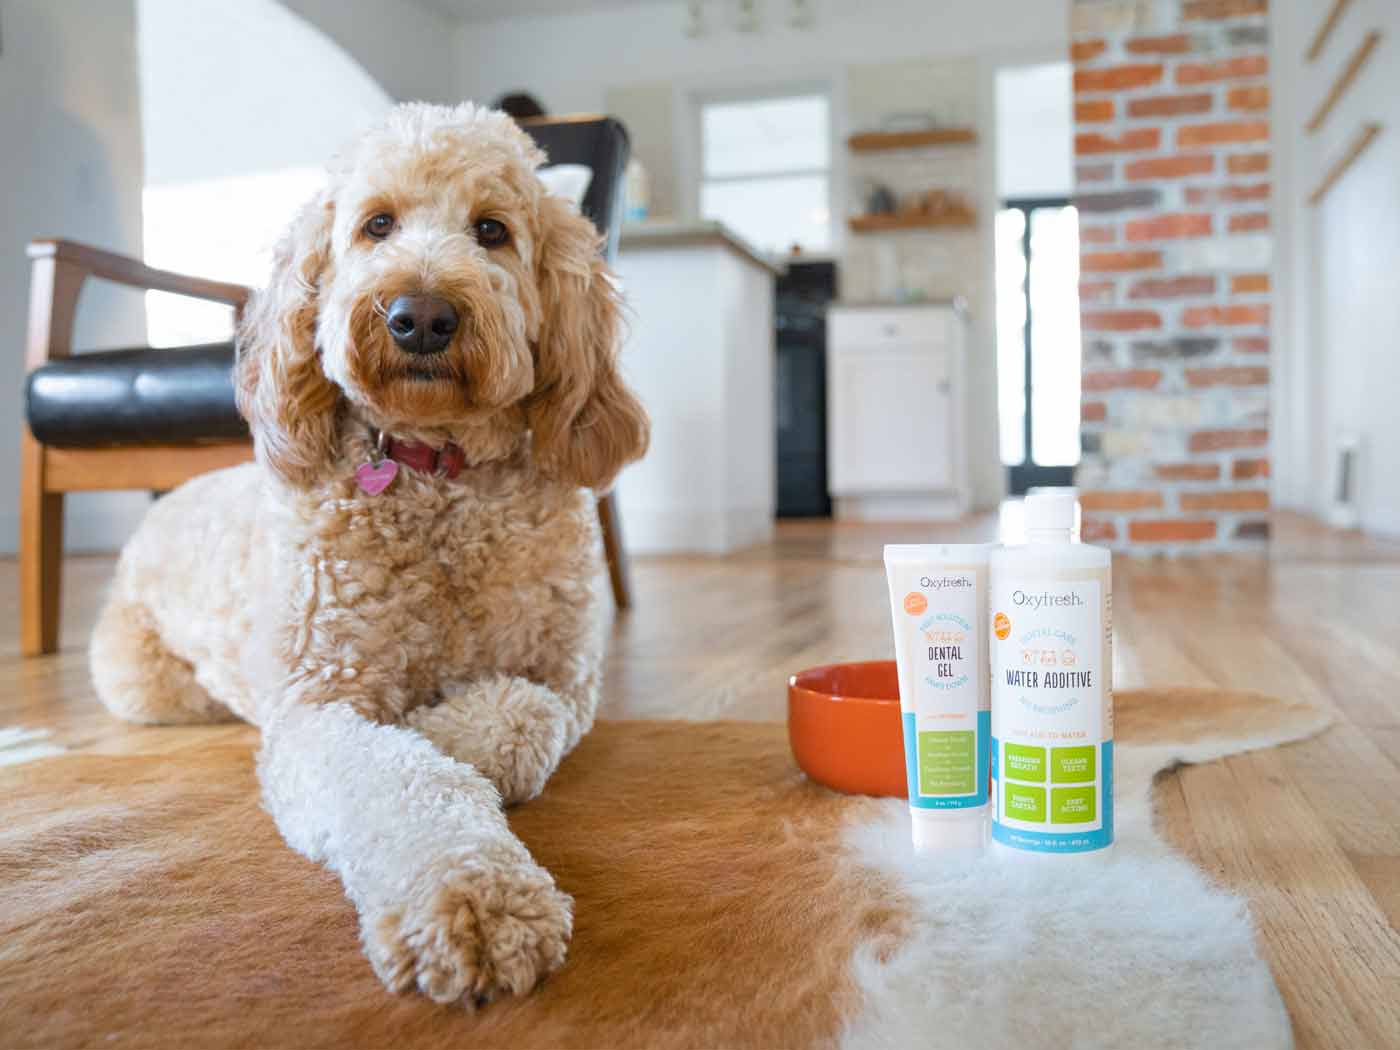 labradoodle-stoically-laying-next-to-oxyfresh-pet-dental-kit-in-living-room